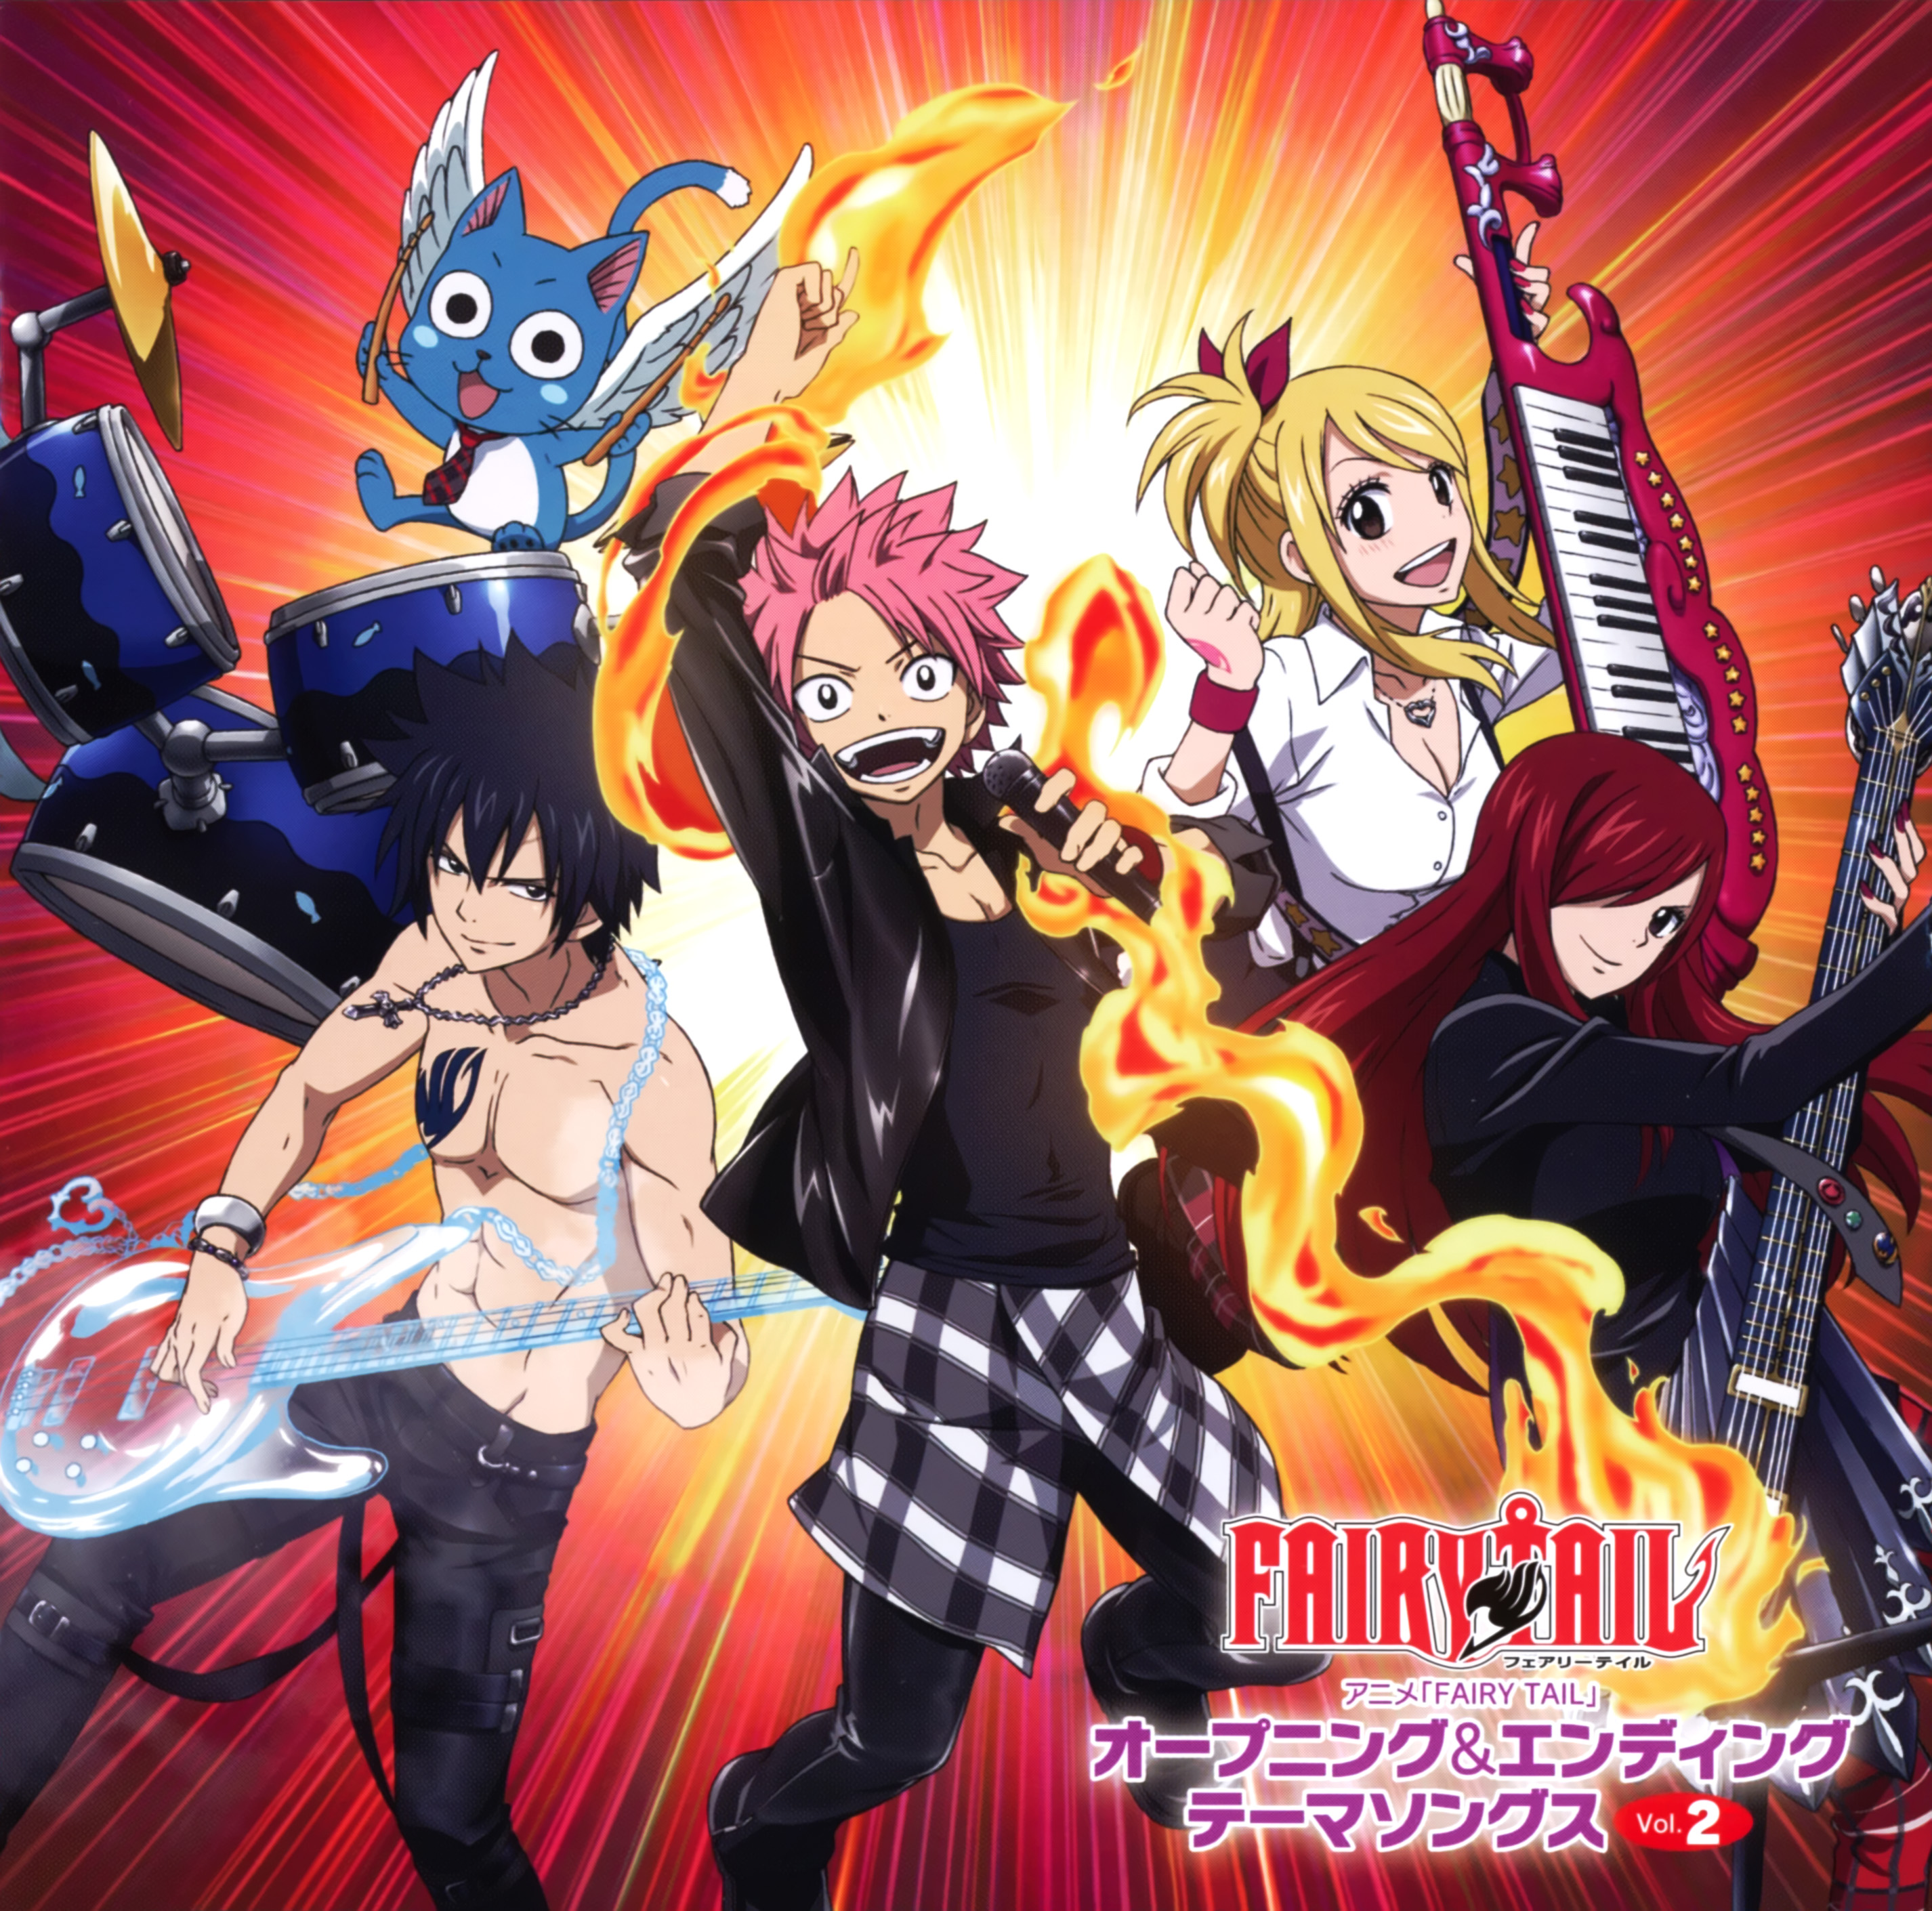 Fairytail Season 2 Images Rock Band Hd Wallpaper And - Fairy Tail Op Ed Theme Songs Vol 2 , HD Wallpaper & Backgrounds